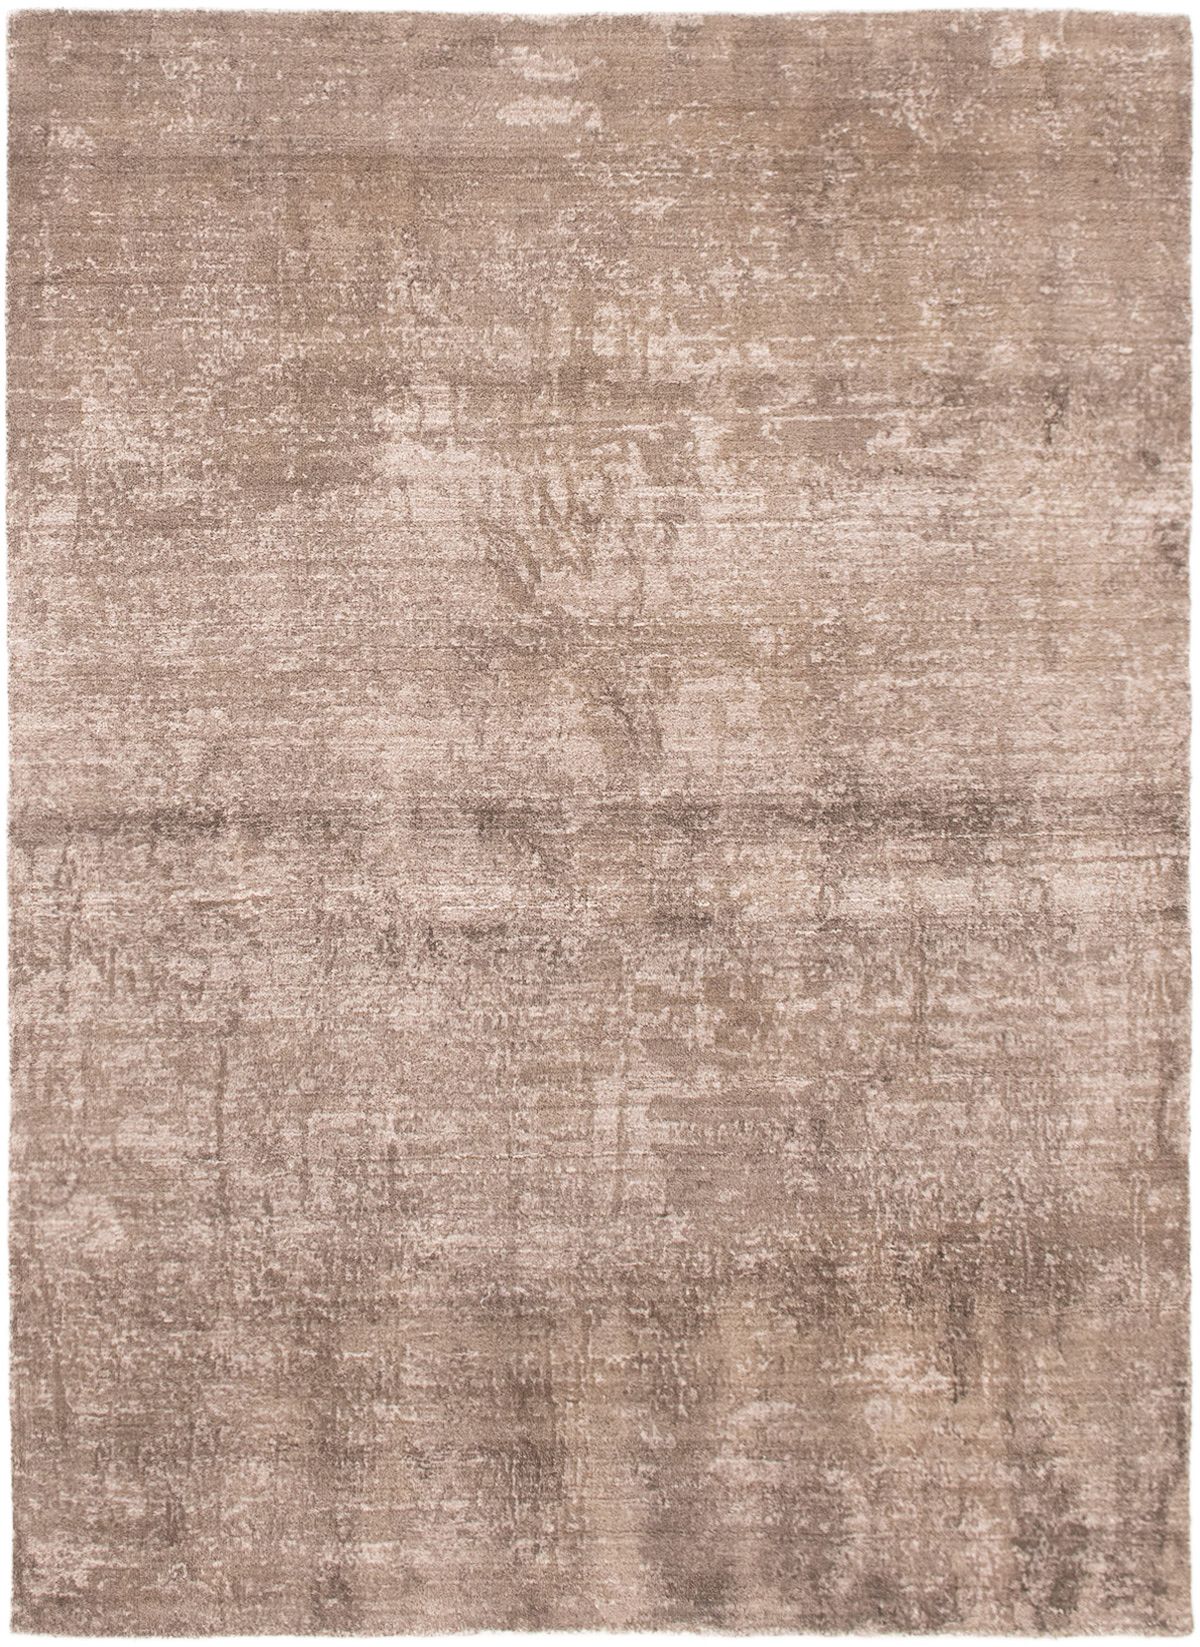 Hand-knotted Eternity Tan Wool Rug 5'3" x 7'3" Size: 5'3" x 7'3"  